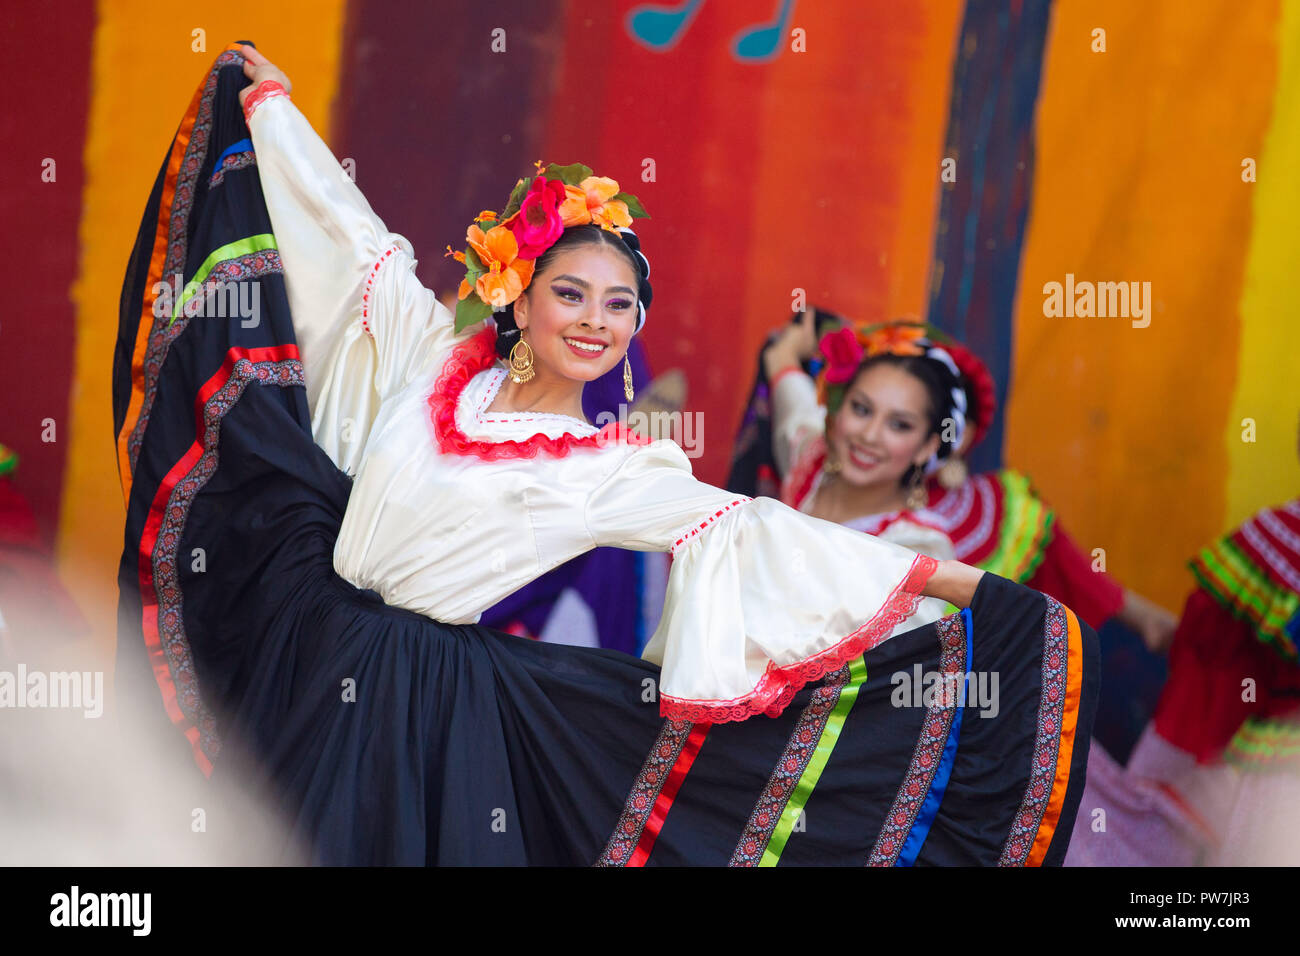 Portland, OR / USA - May 7 2016: Beautiful woman in a traditional latino costume dancing at the cinco de mayo celebration. Stock Photo